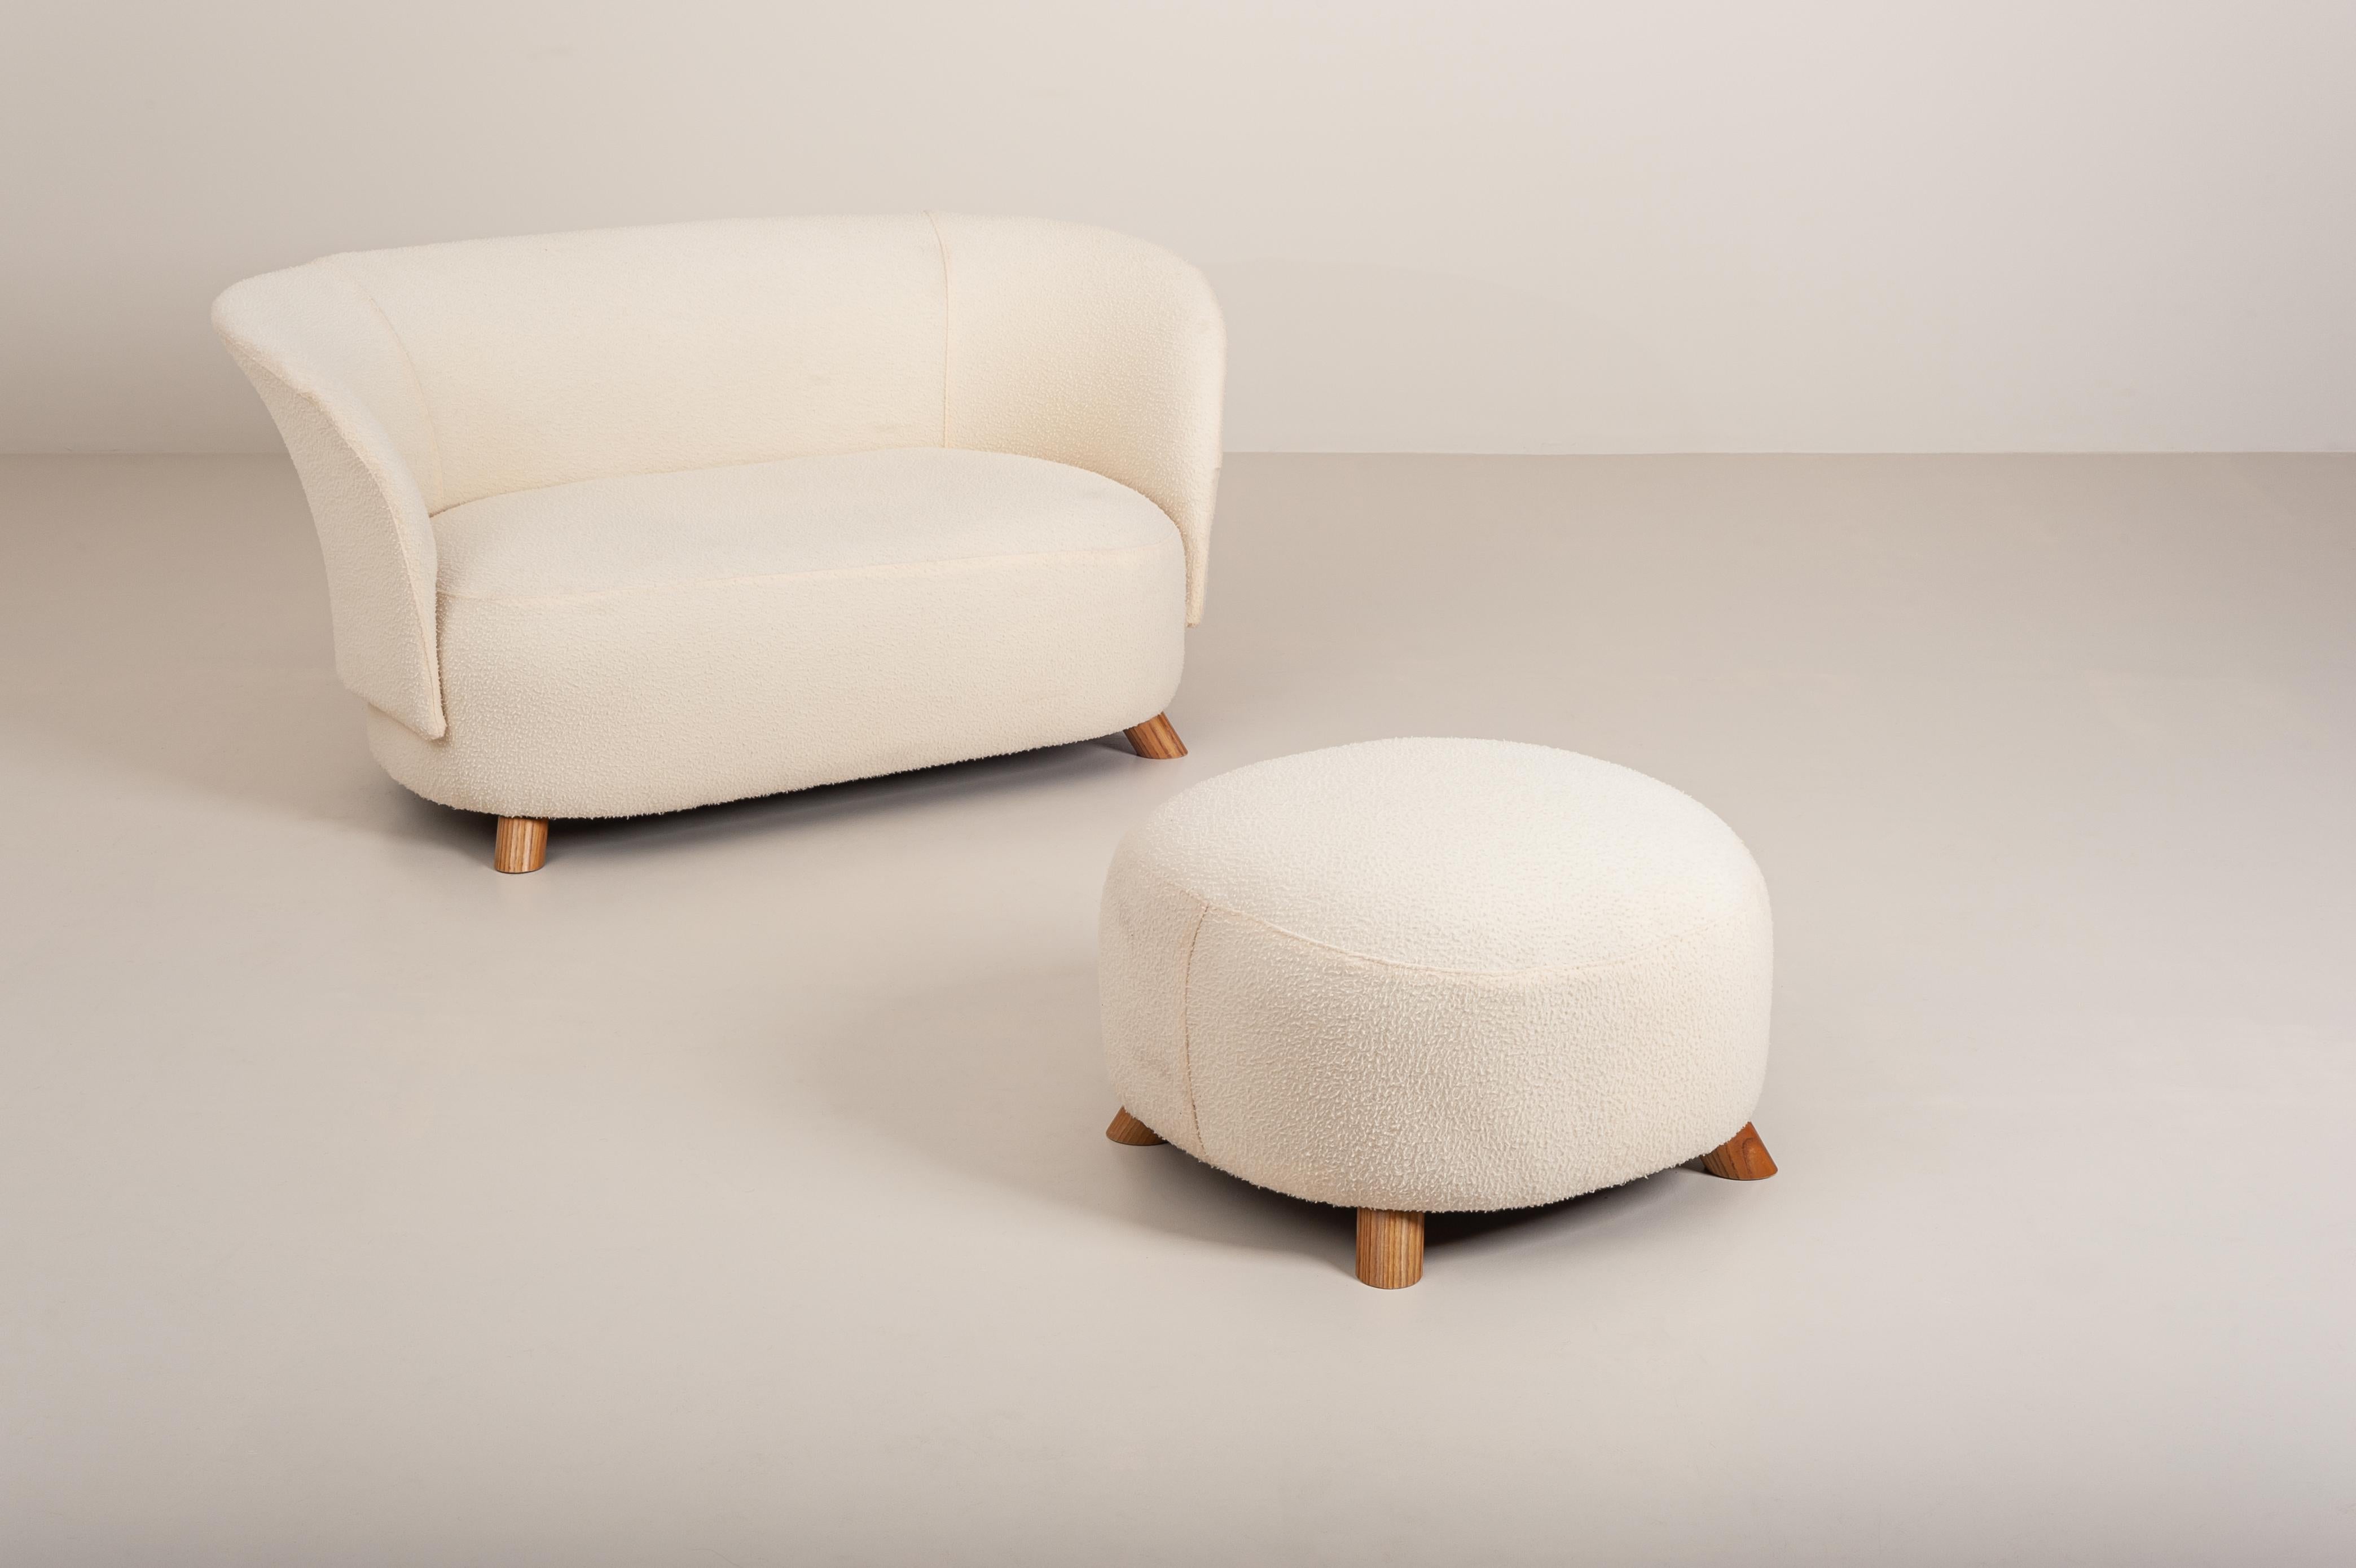 Danish Large Stool Upholstered in 'Casentino' Woollen Fabric, Denmark 1940s In Good Condition For Sale In Chiavari, Liguria